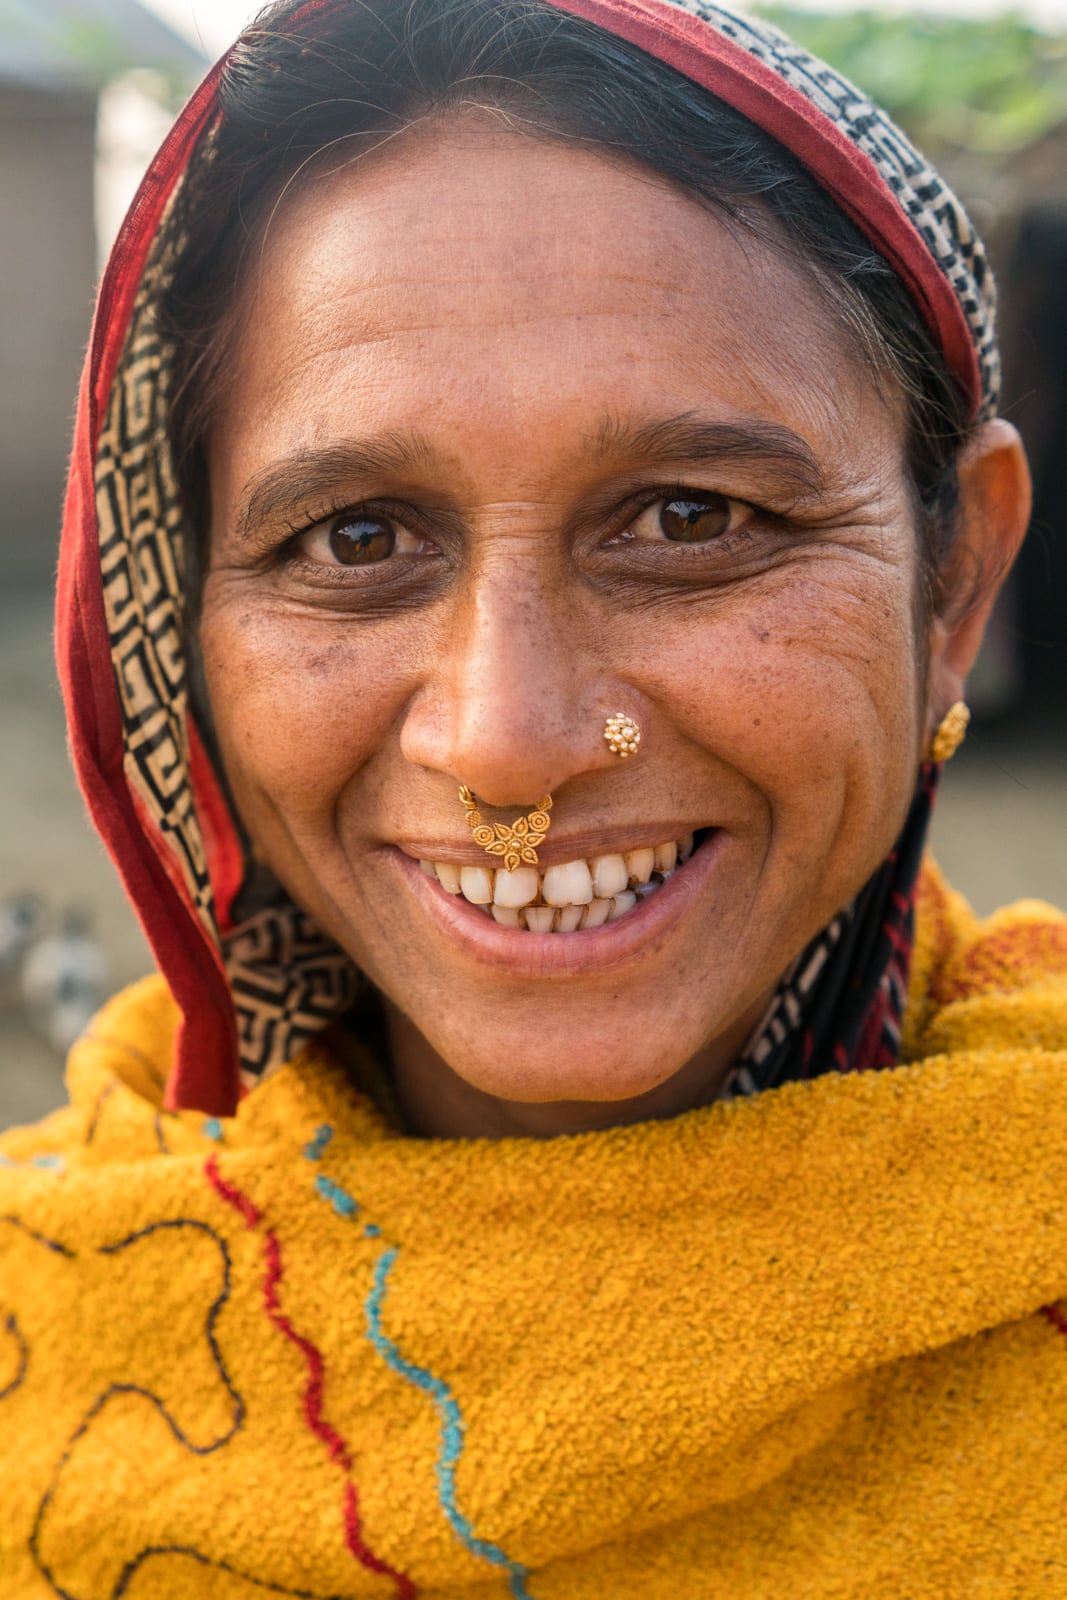 A smiling Bangladeshi woman in yellow headscarf in Assam, India.